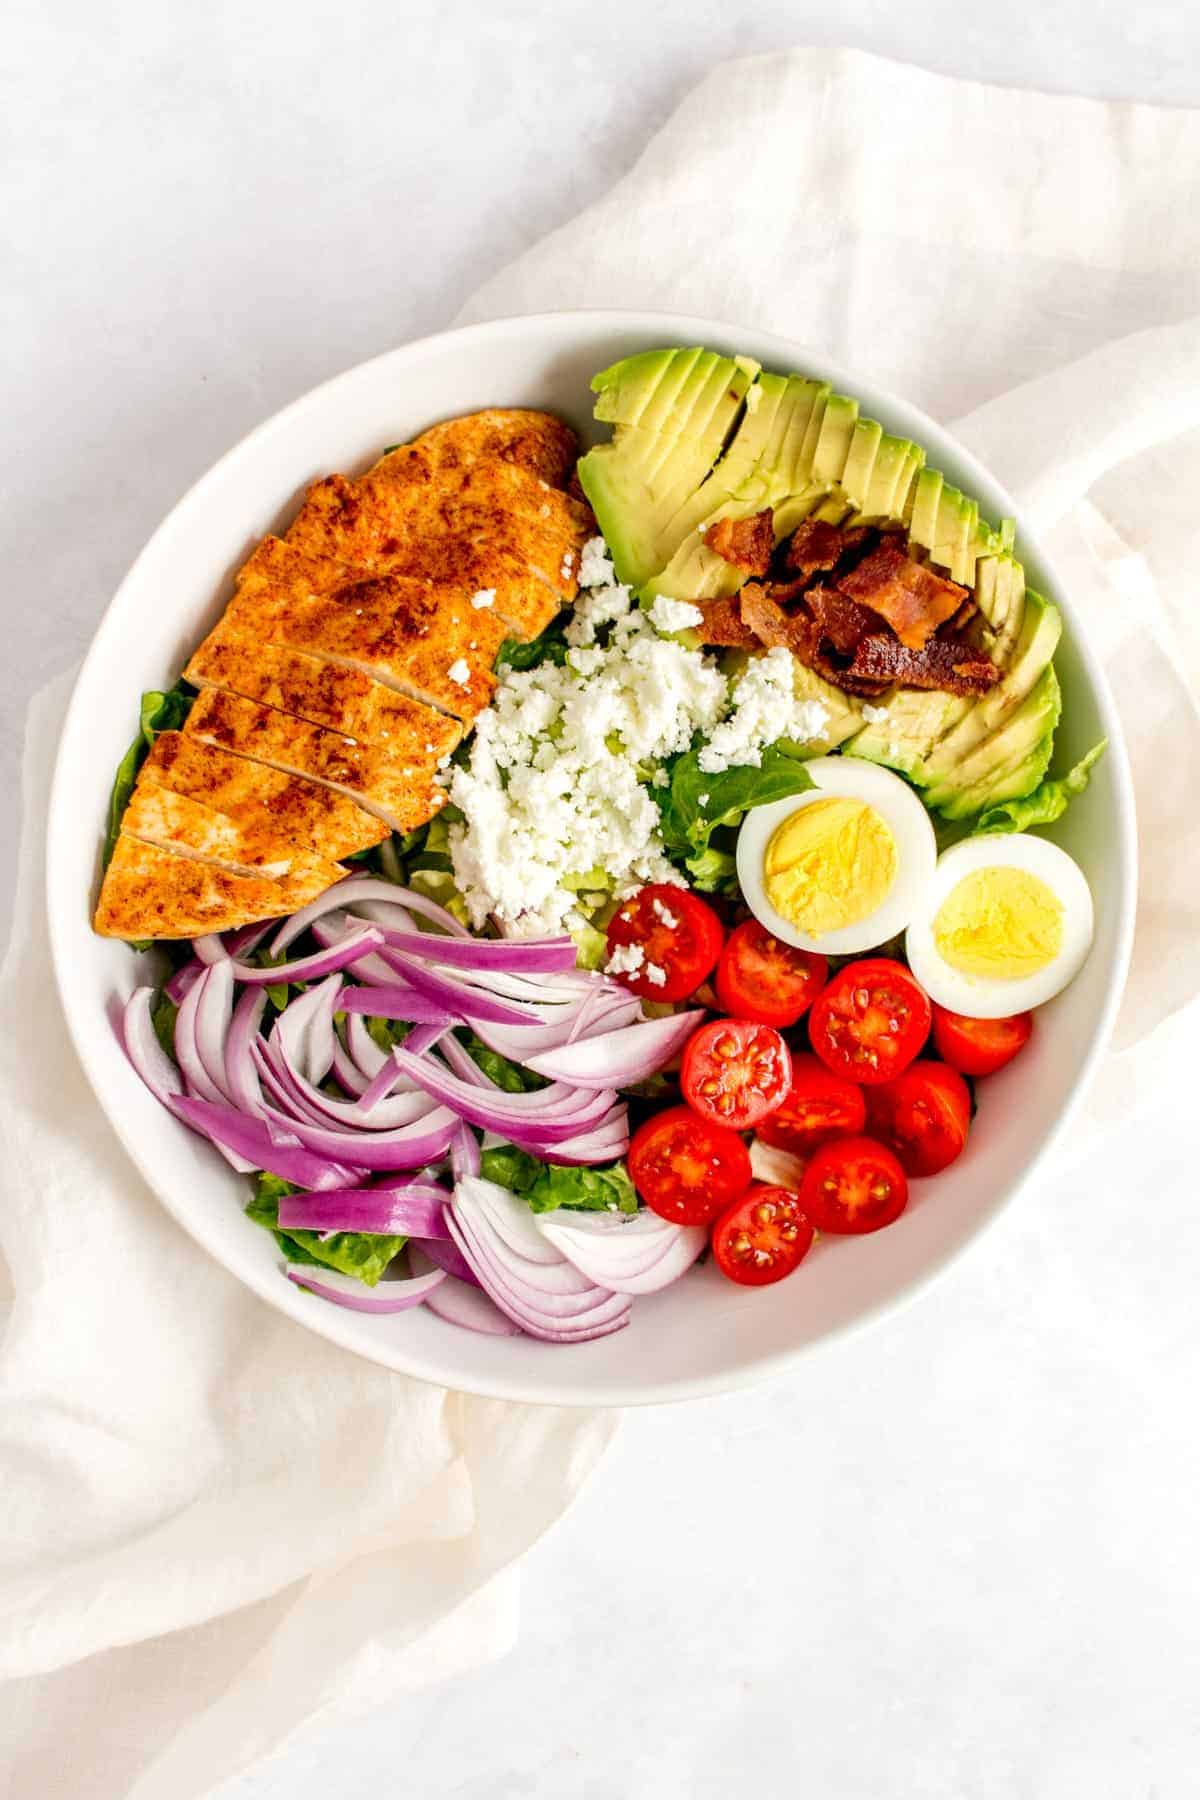 Packed with protein, this super easy healthy Chicken Cobb Salad doesn’t take long to put together and is perfect if you’re looking for a filling salad. It packs really well, making this cobb salad a perfect meal prep as well.